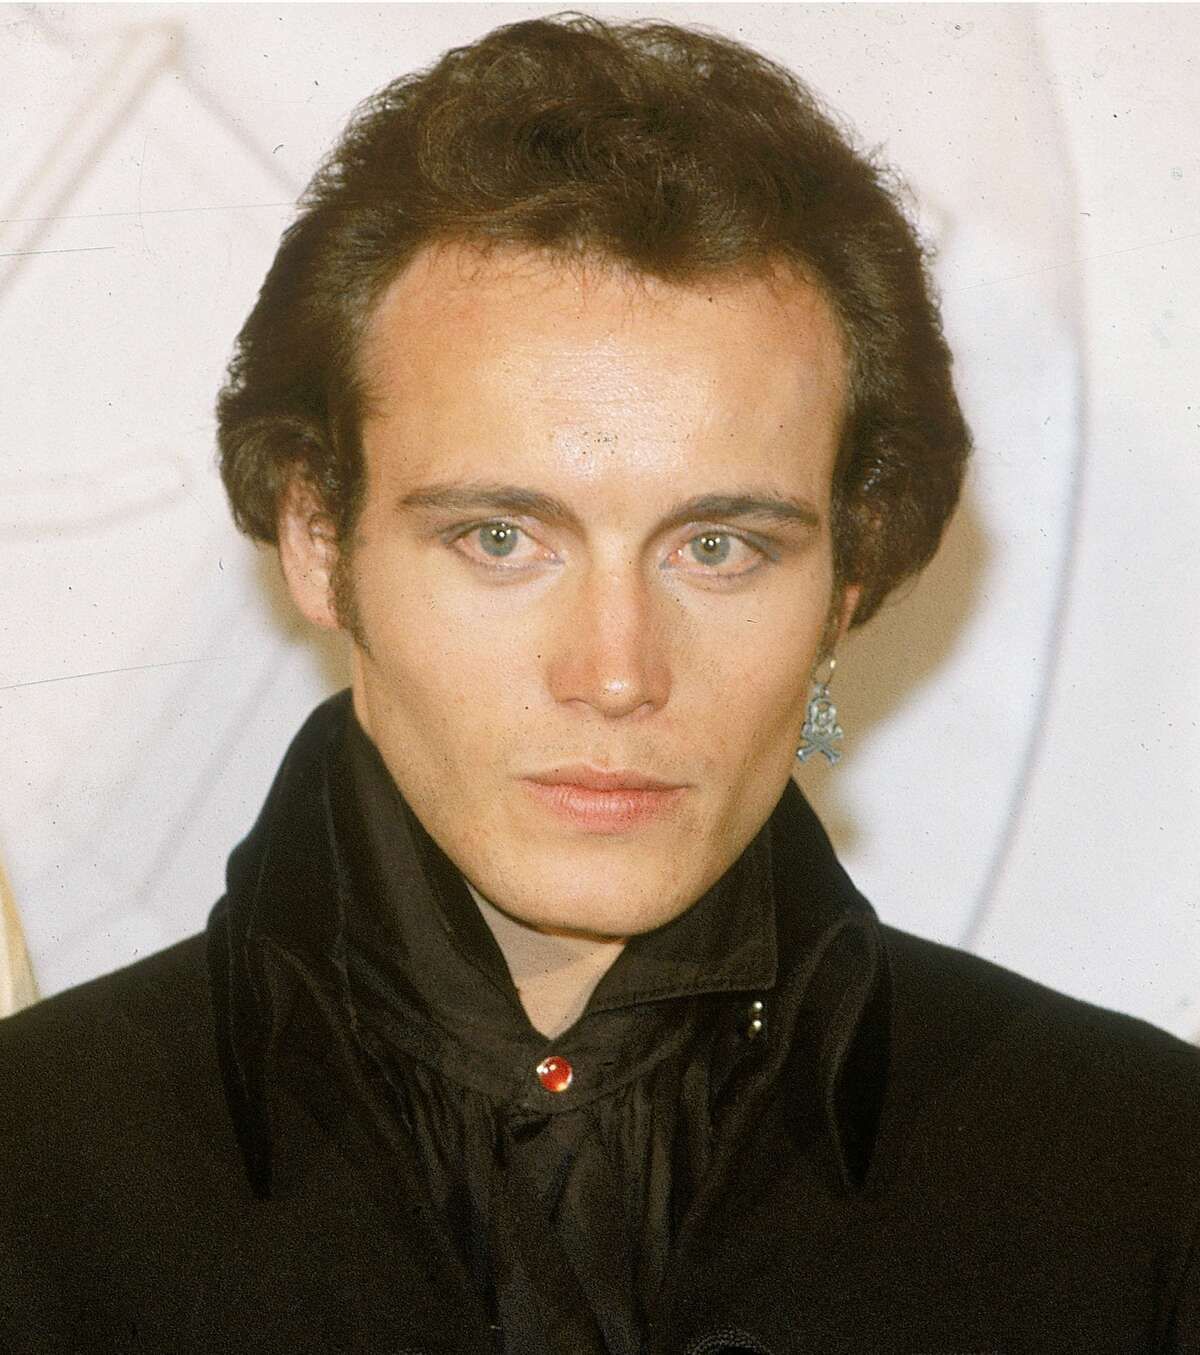 He burst onto the early '80s pop scene as a solo act, literally jumping out of his bed in the MTV music video for his first hit, the catchy horn-driven "Goody Two Shoes." High energy, glib and with a glam-inspired look that conjured pirates long before Johnny Depp, Adam Ant remained something of a novelty despite genuine cred as a UK star. He arrives to the Empire Theatre to pay homage to those high-kicking early days with a performance, top-to-bottom, of the seminal "Kings of the Wild Froniter" released by Adam and the Ants. 8 p.m. Wednesday. Charline McCombs Empire Theatre, 226 N. St. Mary's St. $34-$40. 210-226-5700. majesticempire.com -- Hector Saldana